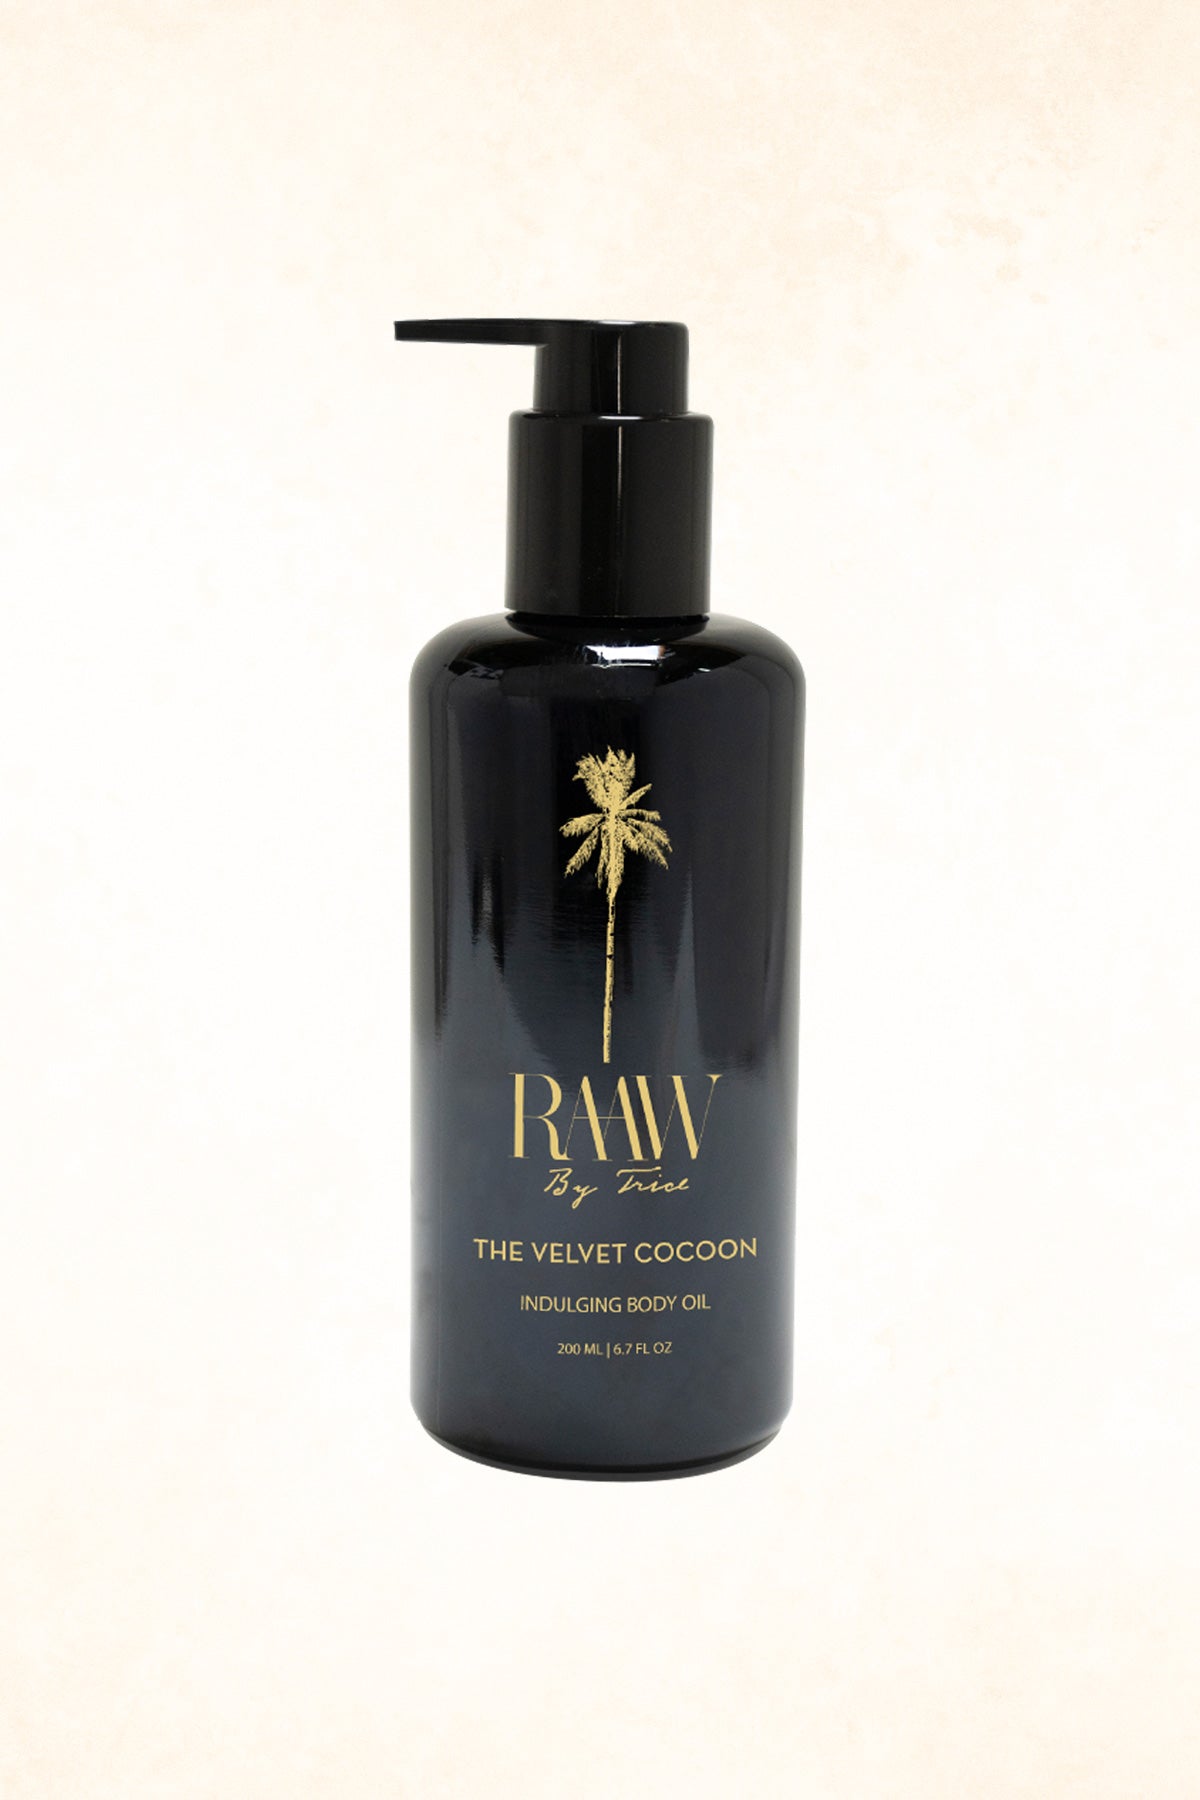 Raaw by Trice – The Velvet Cocoon Body Oil - 200 ml